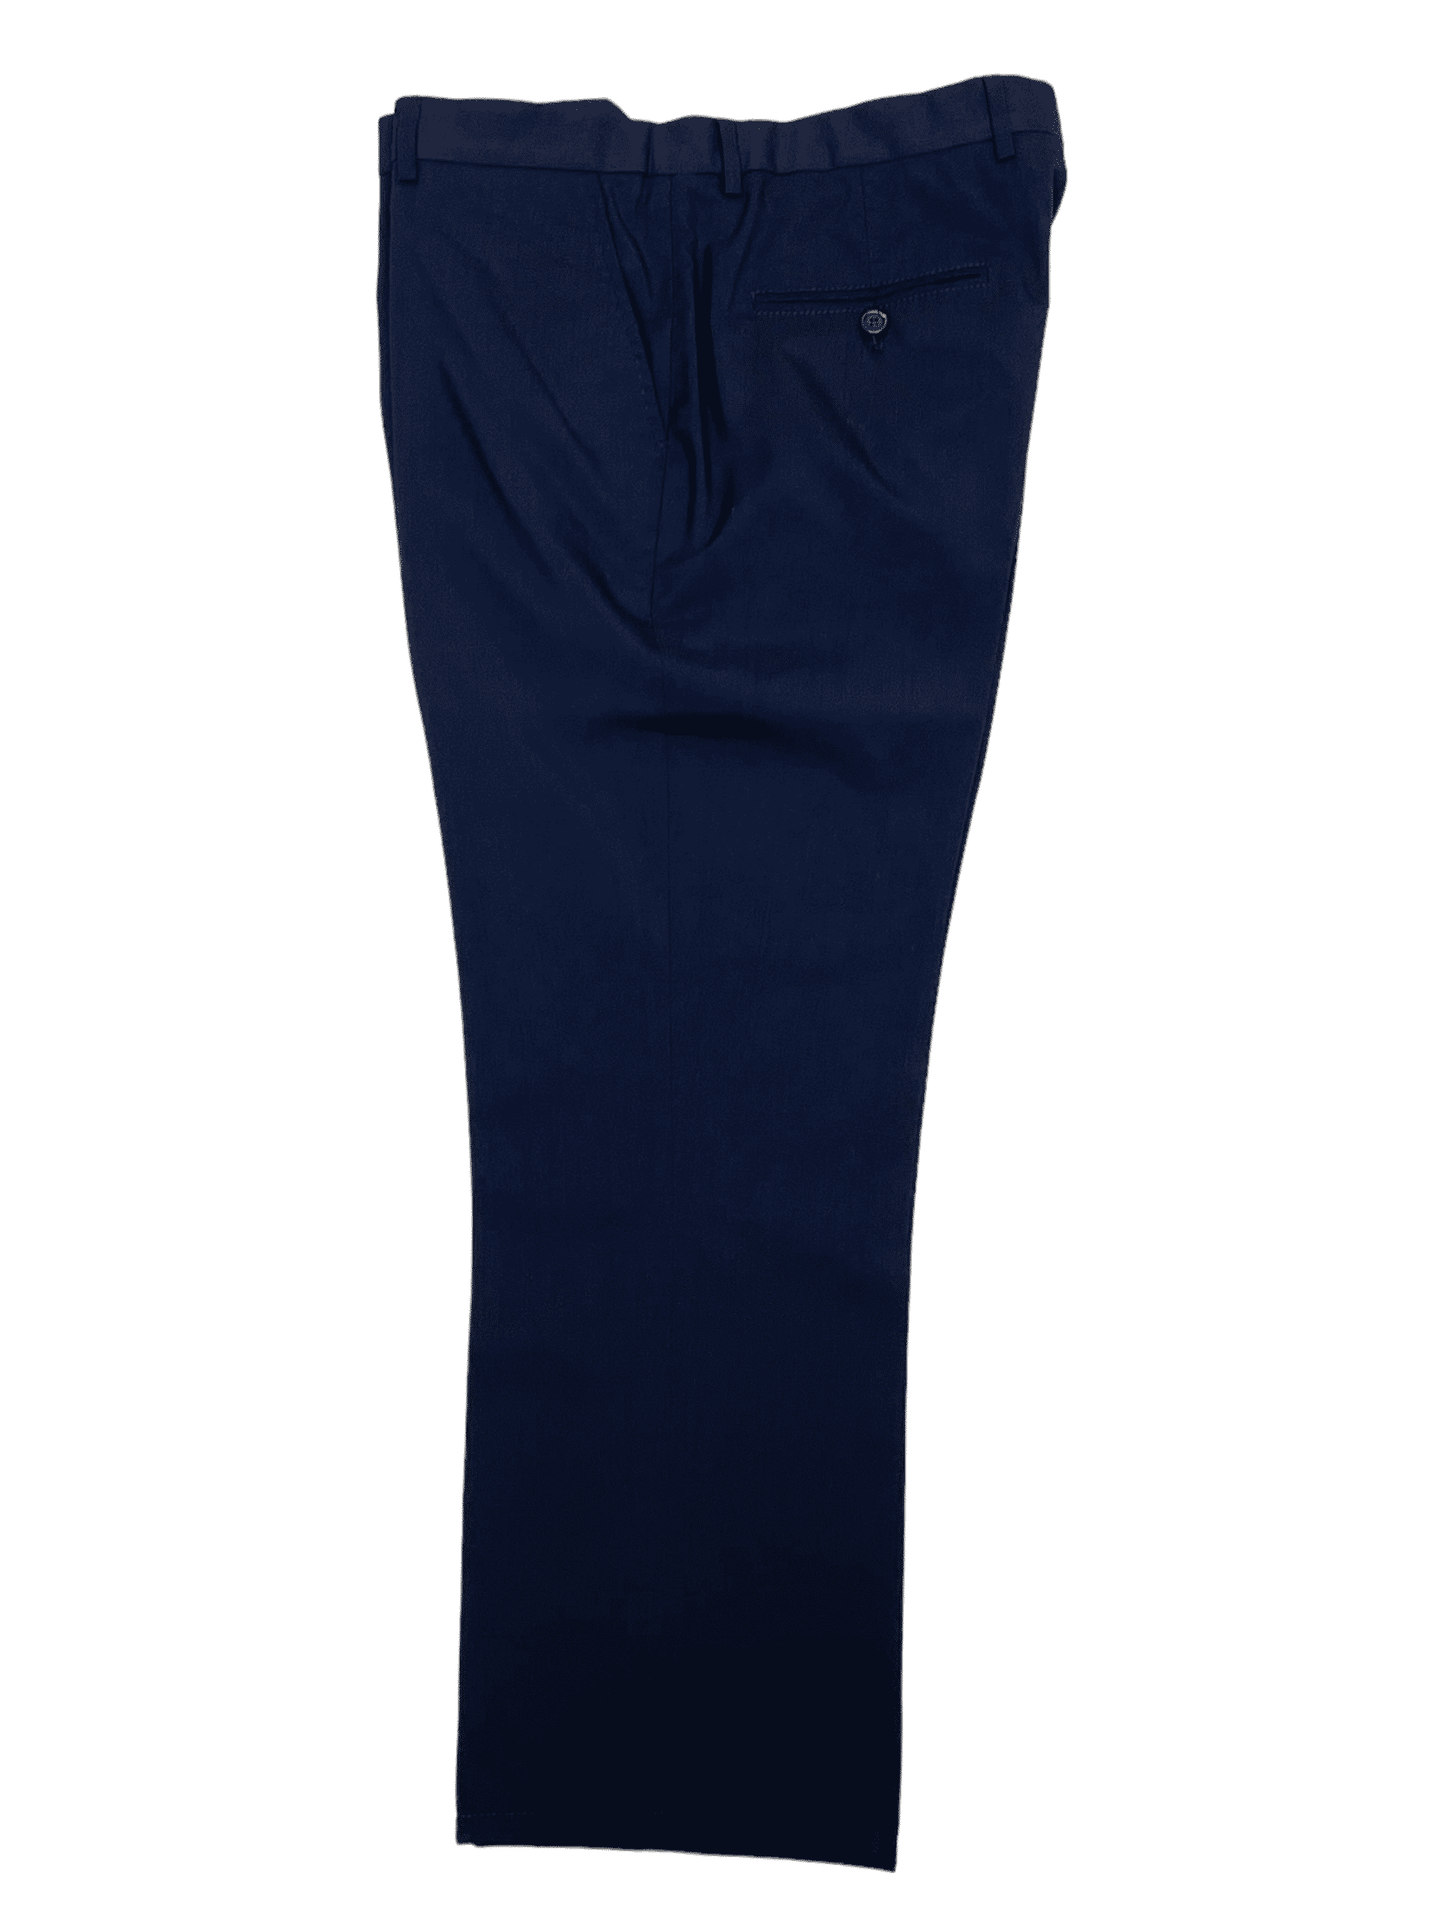 Brunello Cucinelli Navy Wool Dress Pant 34W 28L - Genuine Design Luxury Consignment Calgary, Alberta, Canada New and Pre-Owned Clothing, Shoes, Accessories.